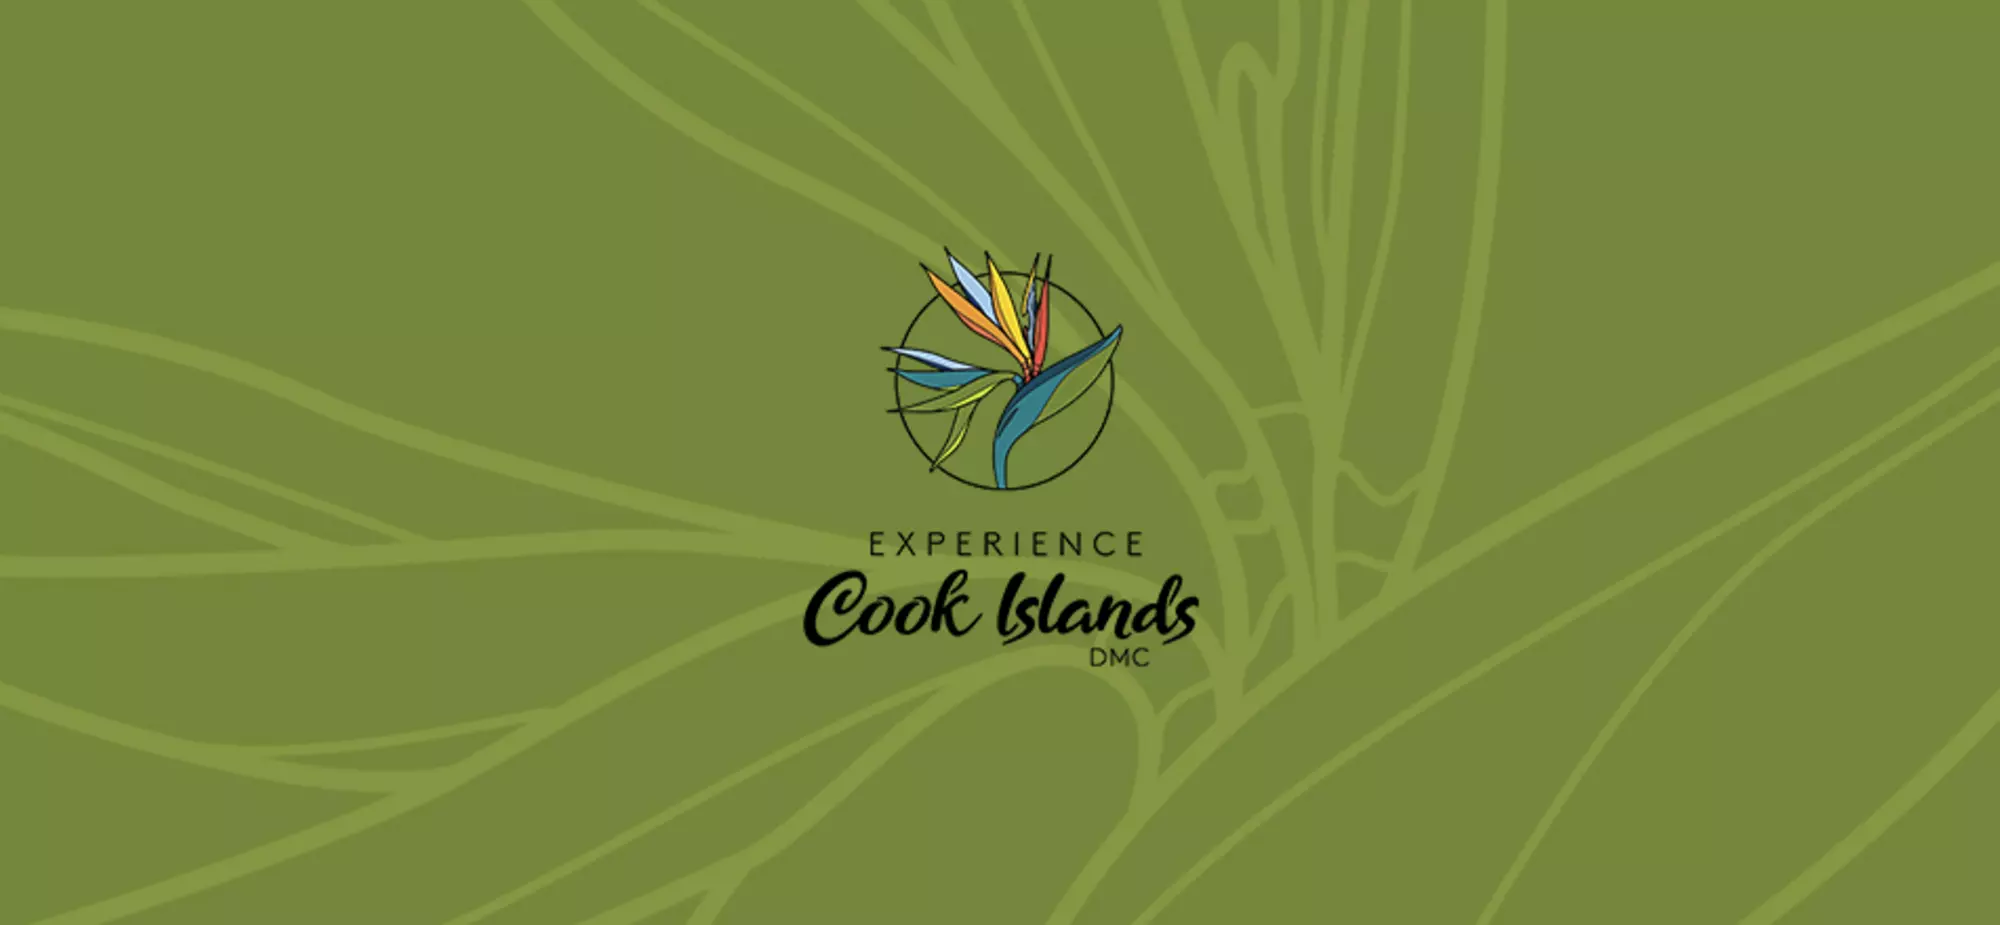 Experience Cook Islands